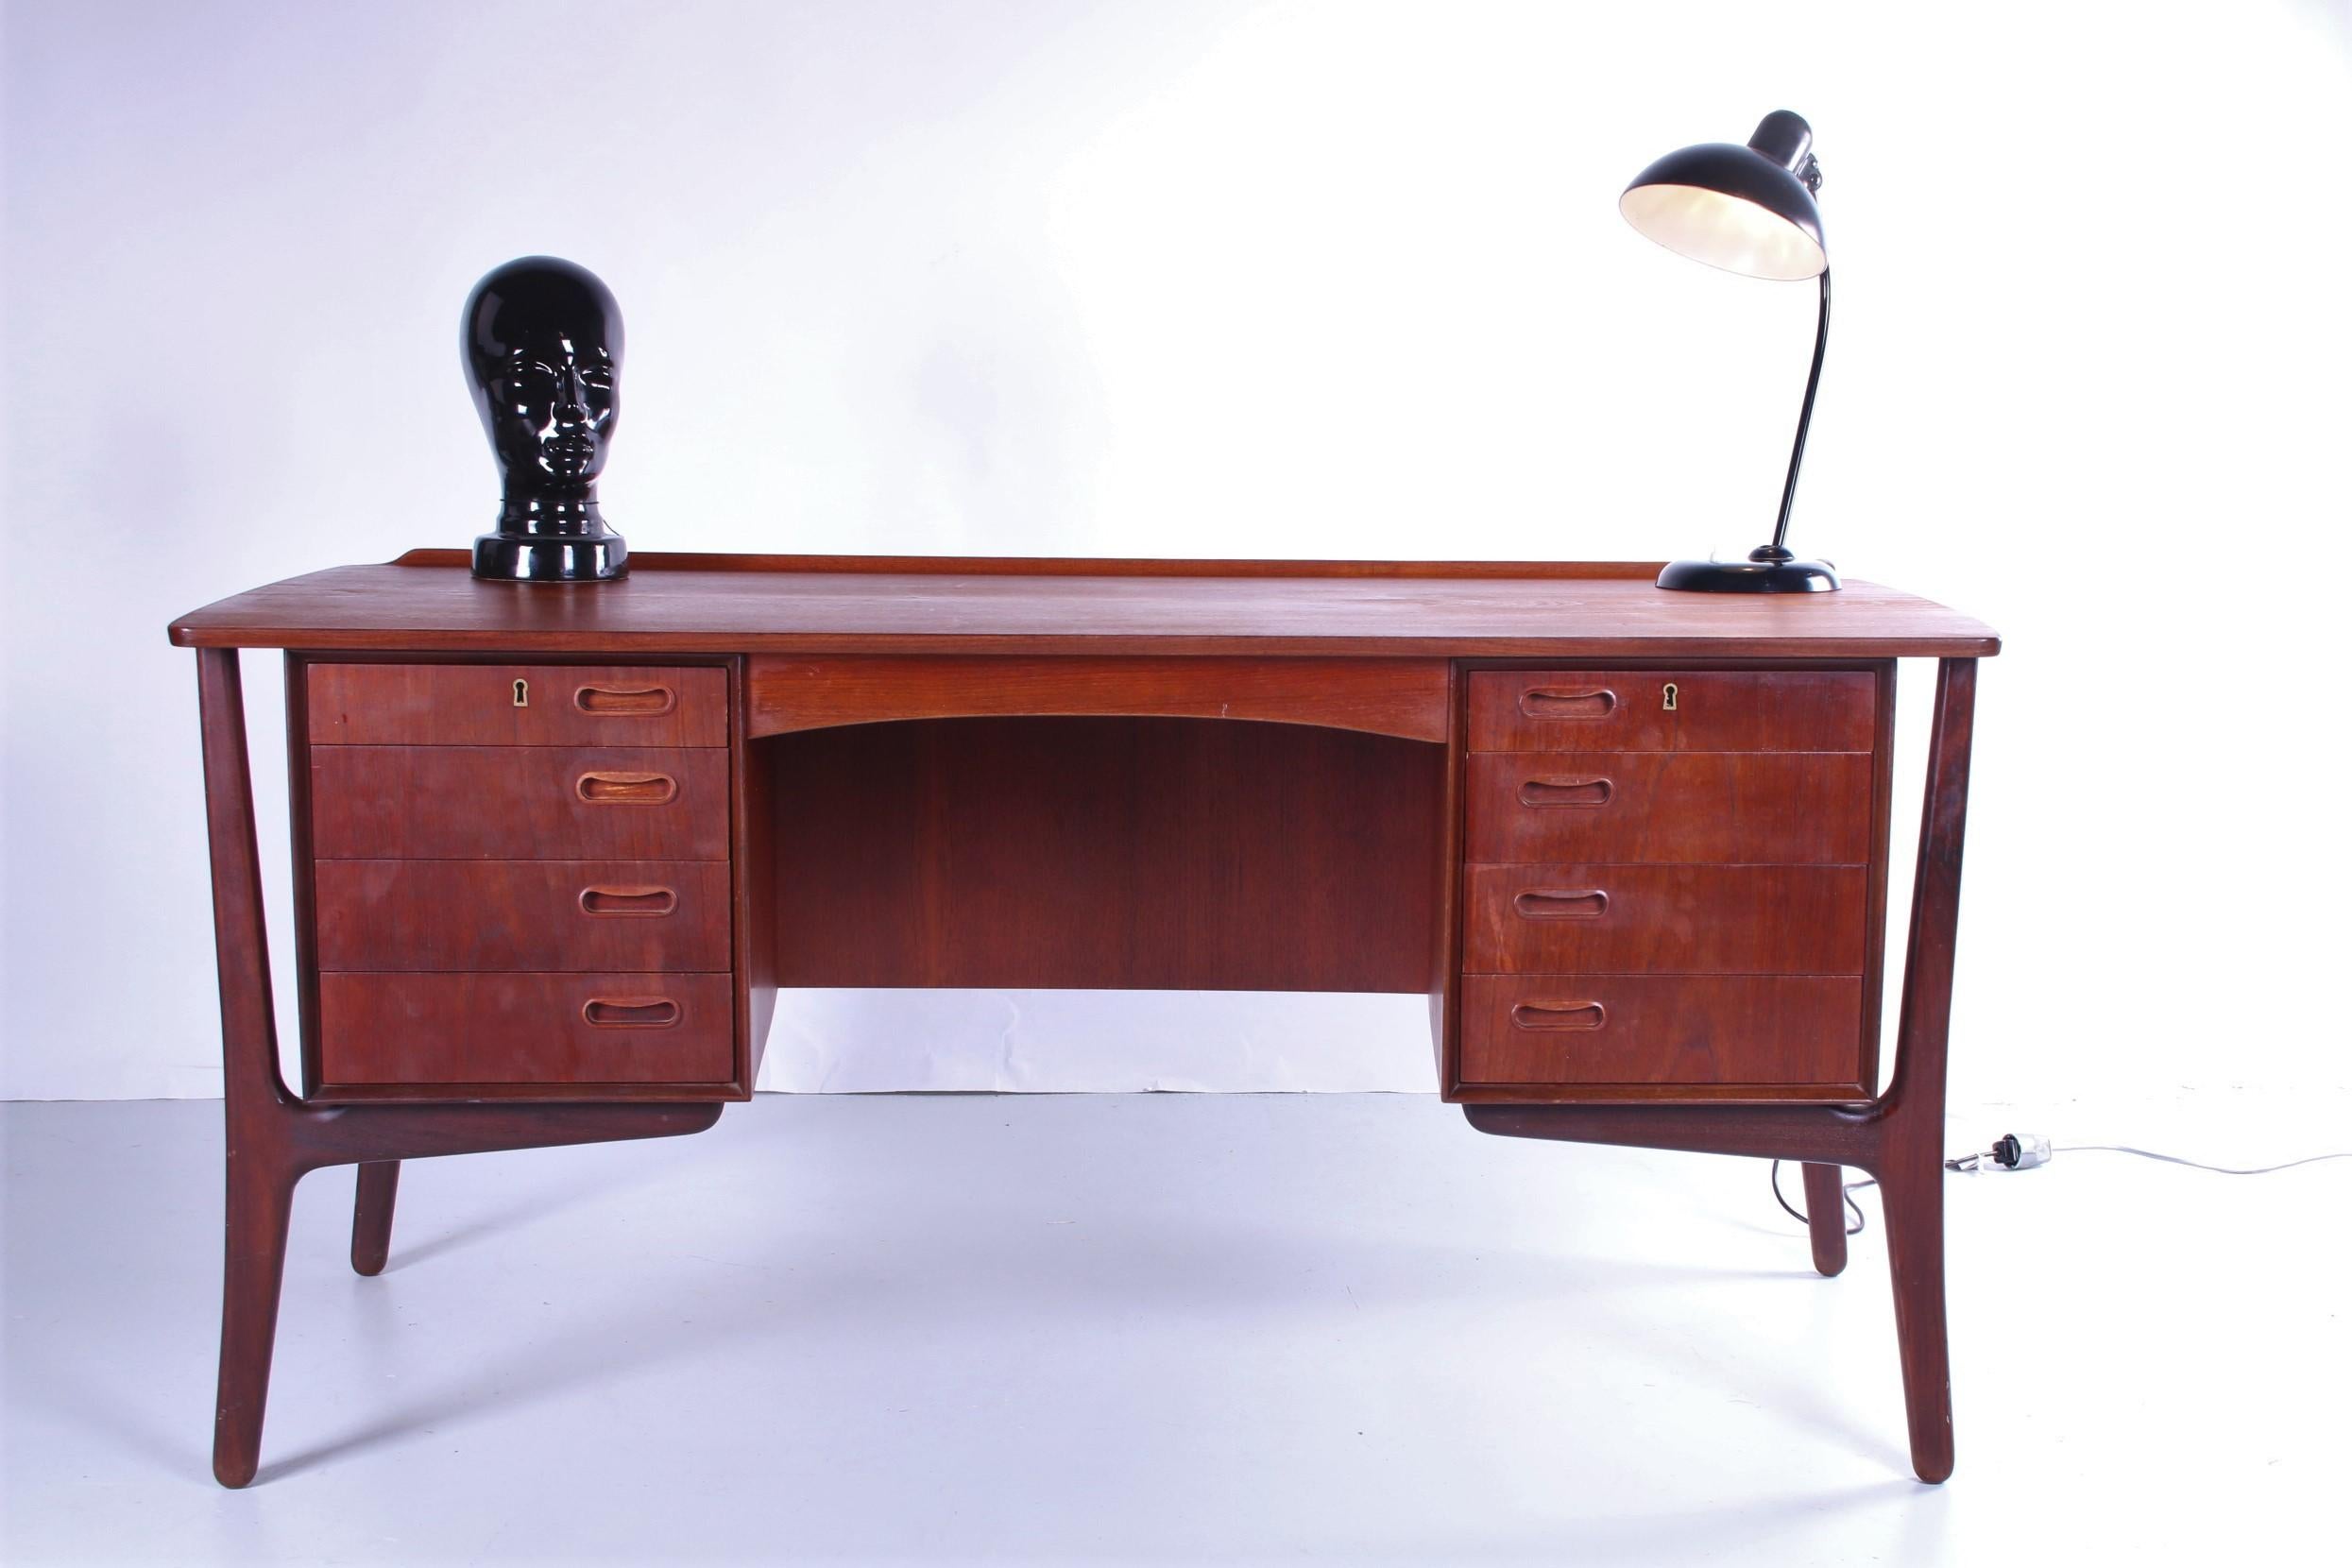 This desk is made of teak. The wood used in the design has a beautiful finish. The designer for this desk was Svend Åge Madsen for HP Hansen.
The desk has a beautiful sleek Danish design with eight drawers for storing all of your important